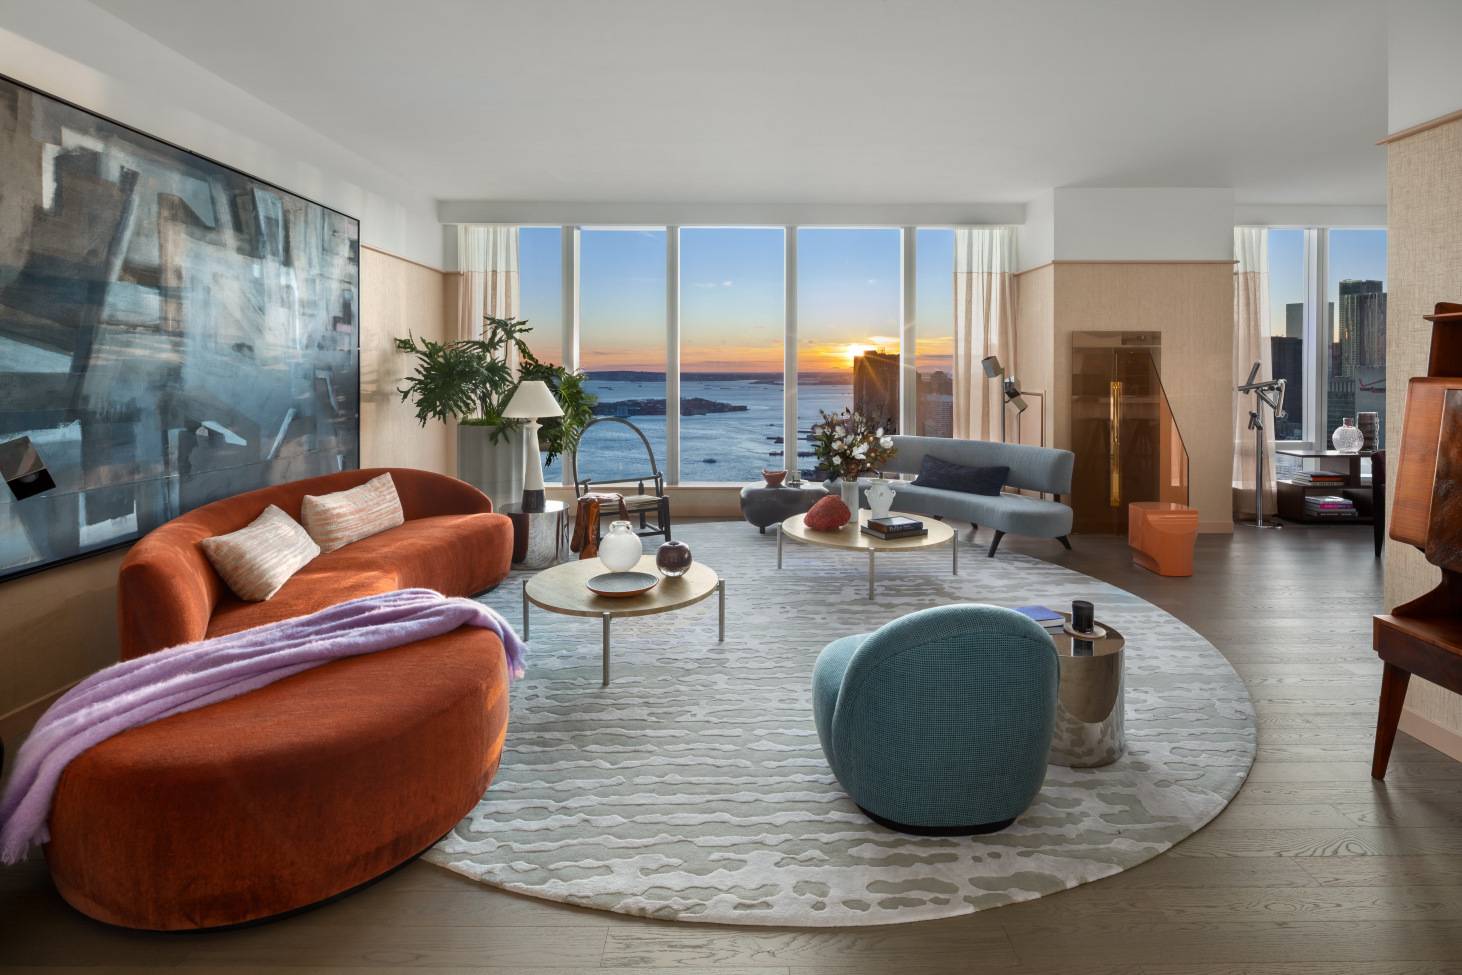 Live amongst the clouds in Residence 64J, part of The Skyscape Collection at One Manhattan Square.